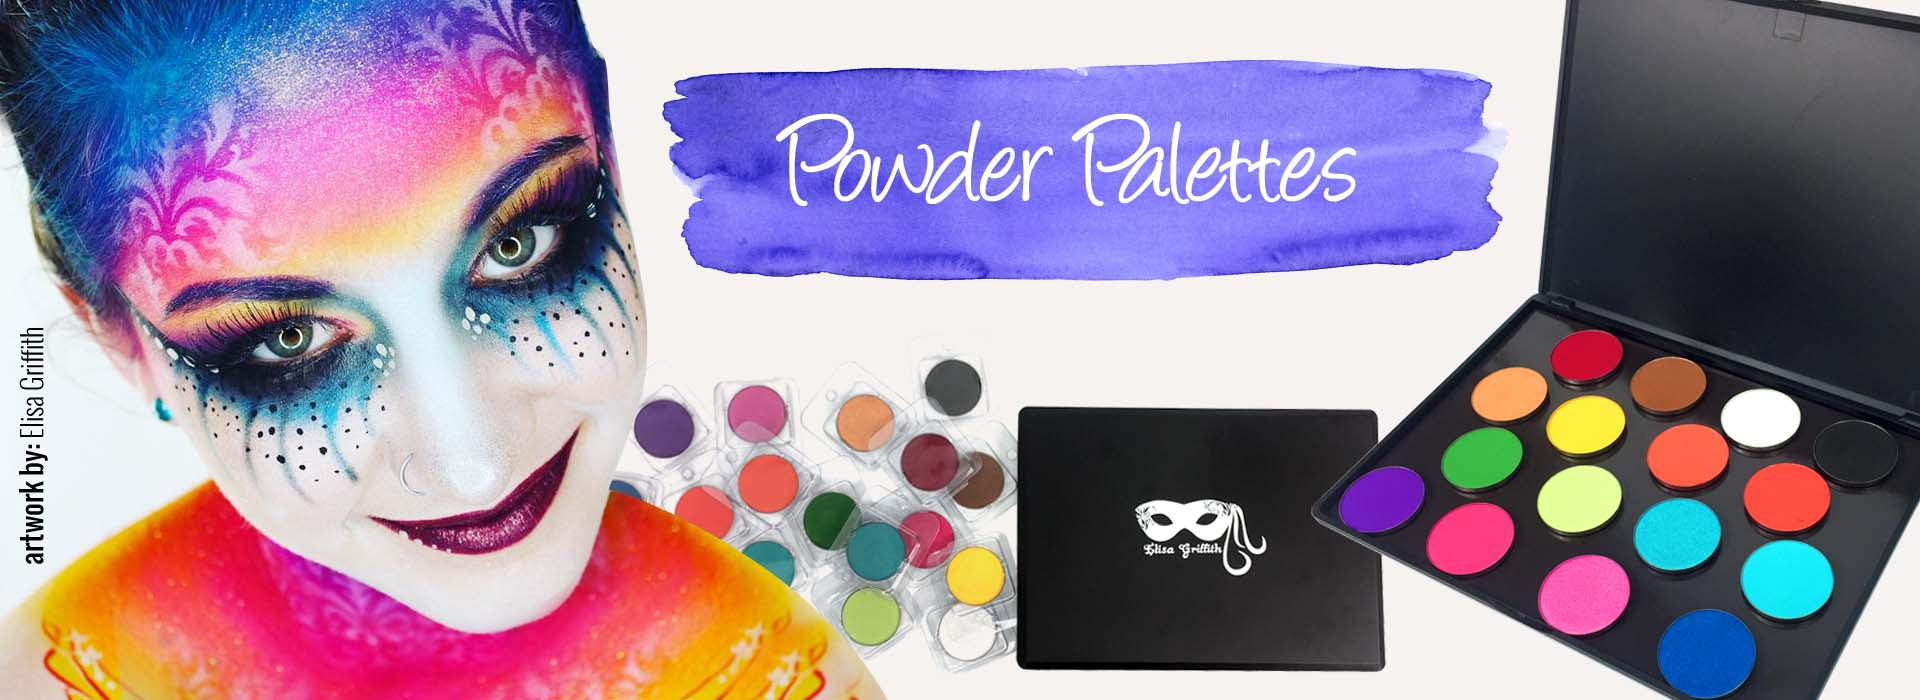 8 Colours Water Activated Eyeliner Palette,body Painting Kit,high